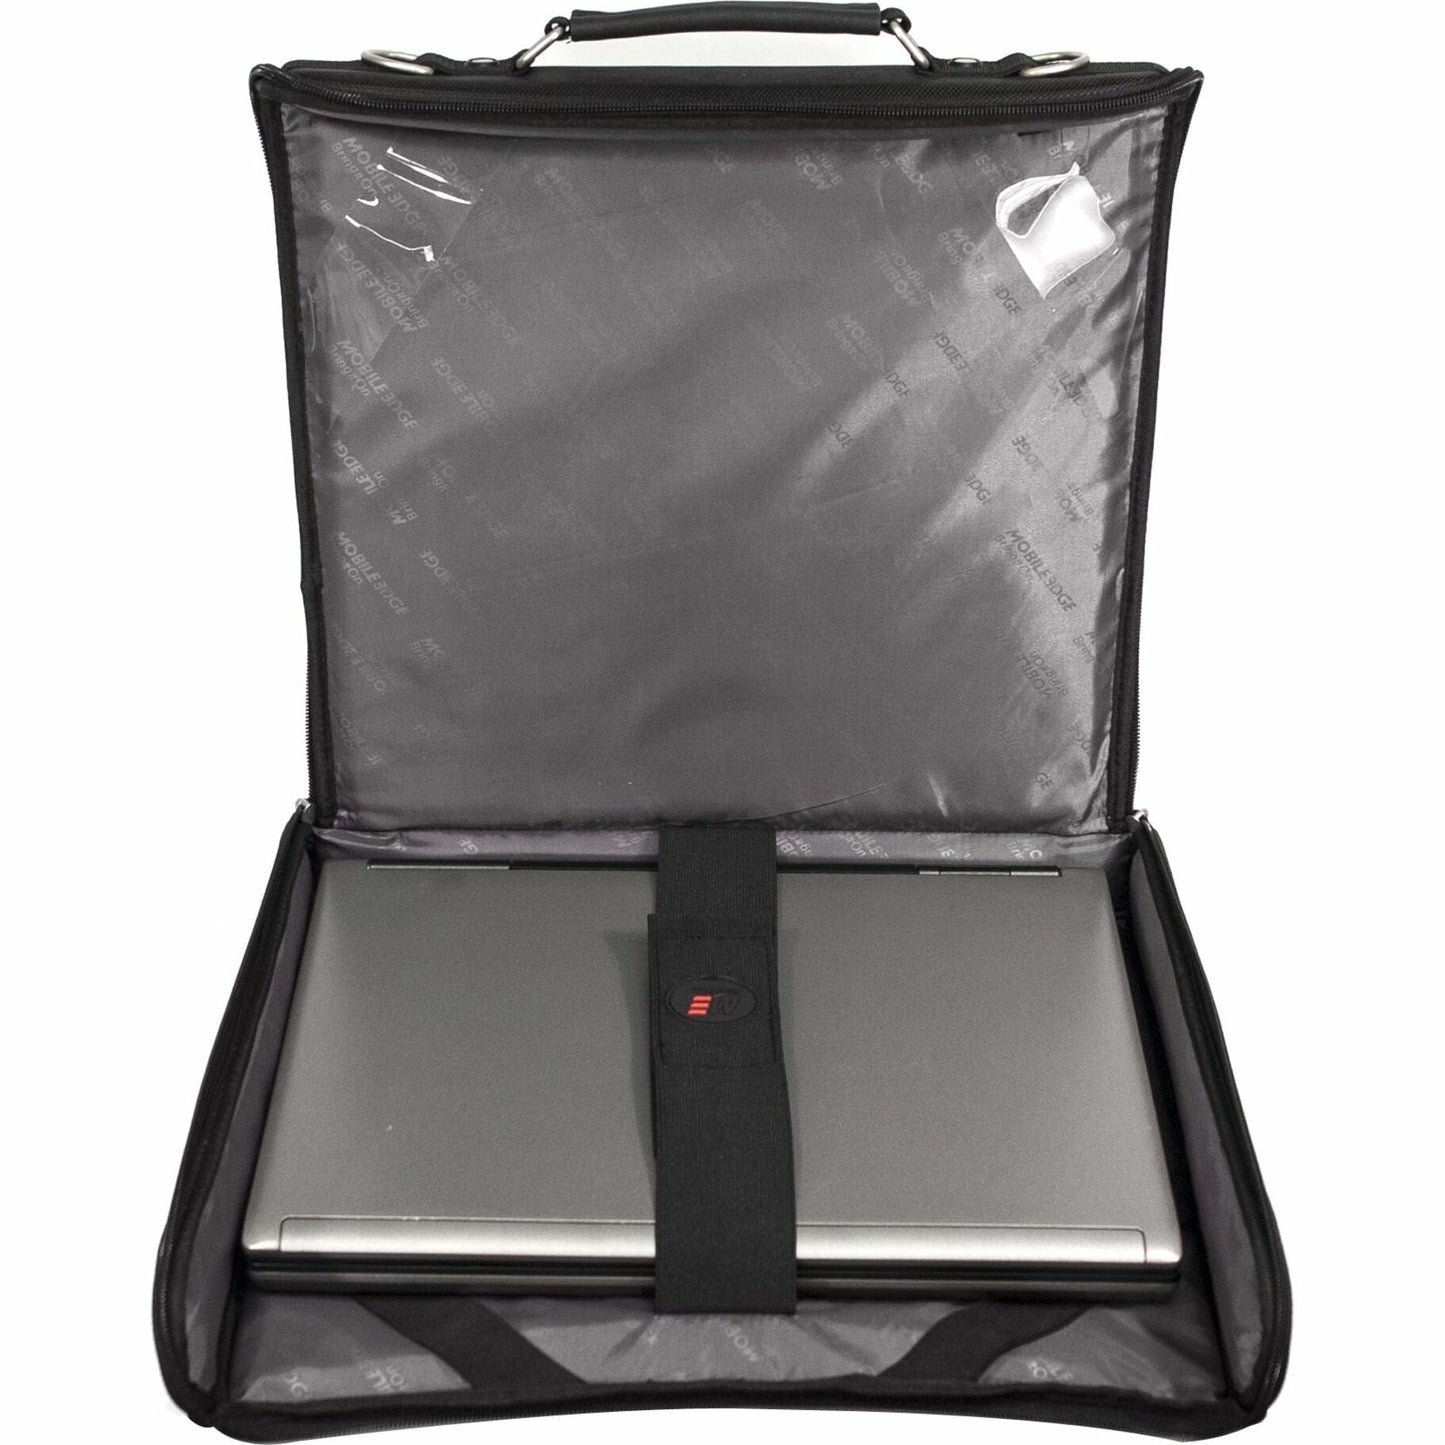 Mobile Edge Express Carrying Case (Briefcase) for 11.6" Chromebook - Black